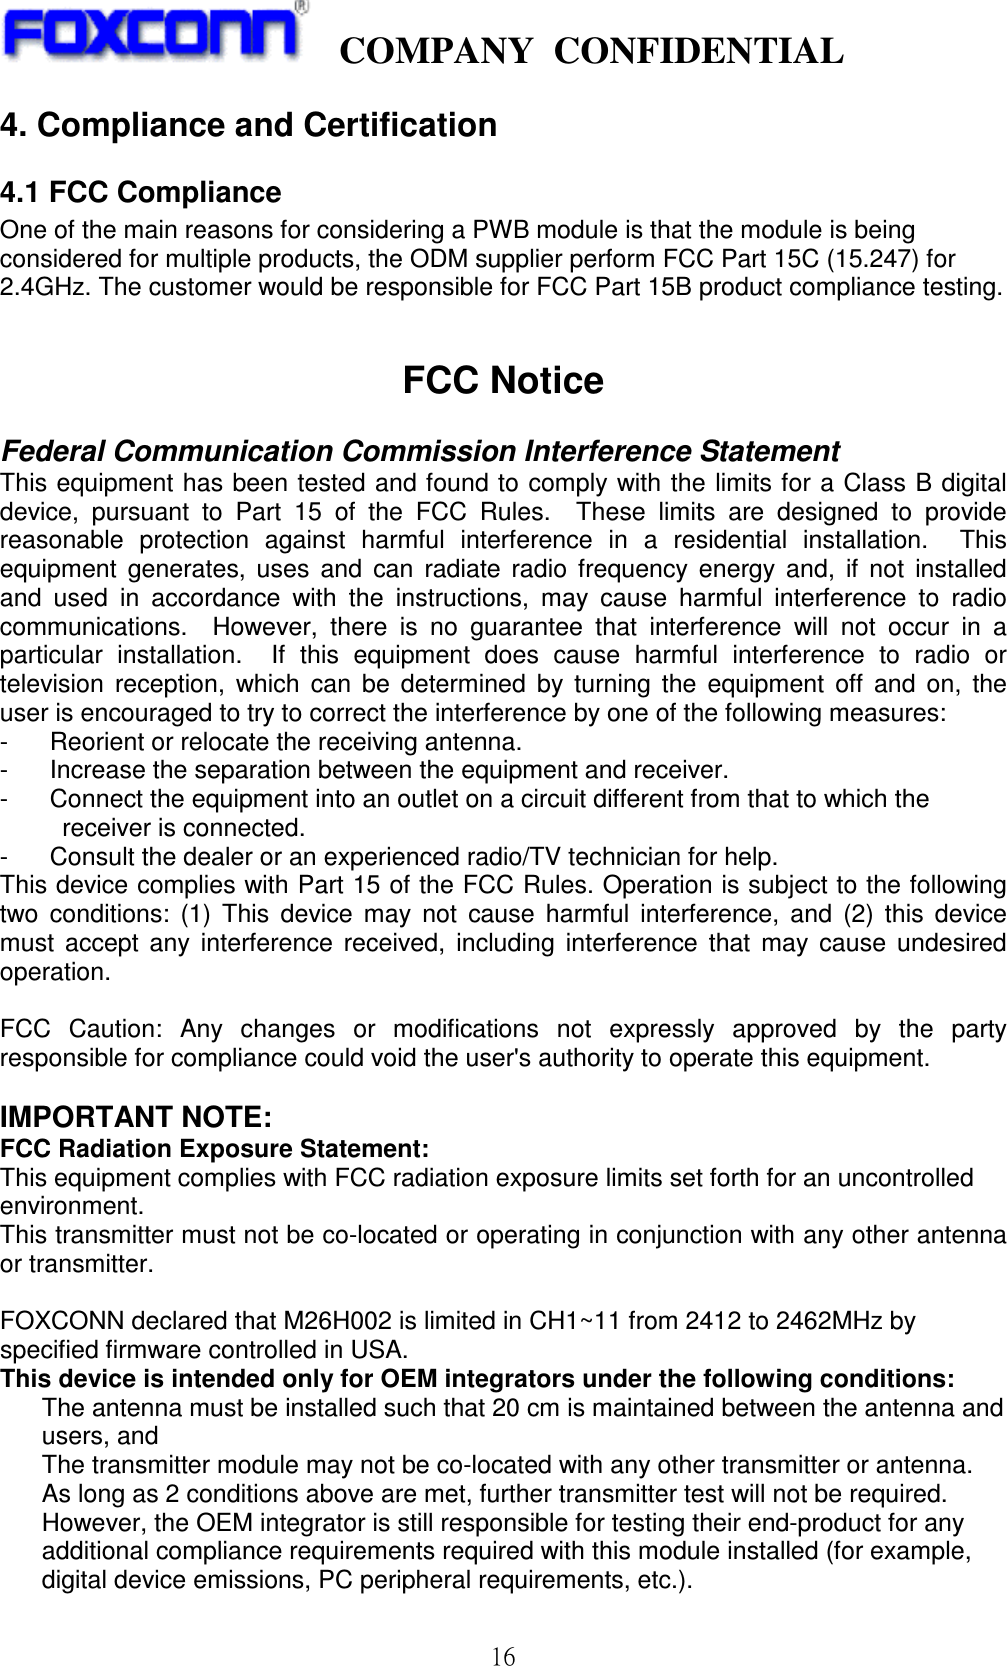    COMPANY  CONFIDENTIAL             16 4. Compliance and Certification         4.1 FCC Compliance One of the main reasons for considering a PWB module is that the module is being considered for multiple products, the ODM supplier perform FCC Part 15C (15.247) for 2.4GHz. The customer would be responsible for FCC Part 15B product compliance testing.   FCC Notice  Federal Communication Commission Interference Statement This equipment has been tested and found to comply with the limits for  a Class B digital device,  pursuant  to  Part  15  of  the  FCC  Rules.    These  limits  are  designed  to  provide reasonable  protection  against  harmful  interference  in  a  residential  installation.    This equipment  generates,  uses  and  can  radiate  radio  frequency  energy  and,  if  not  installed and  used  in  accordance  with  the  instructions,  may  cause  harmful  interference  to  radio communications.    However,  there  is  no  guarantee  that  interference  will  not  occur  in  a particular  installation.    If  this  equipment  does  cause  harmful  interference  to  radio  or television  reception,  which  can  be  determined  by  turning  the  equipment  off  and  on,  the user is encouraged to try to correct the interference by one of the following measures: -  Reorient or relocate the receiving antenna. -  Increase the separation between the equipment and receiver. -  Connect the equipment into an outlet on a circuit different from that to which the   receiver is connected. -  Consult the dealer or an experienced radio/TV technician for help. This device complies with Part 15 of the FCC Rules. Operation is subject to the following two  conditions:  (1)  This  device  may  not  cause  harmful  interference,  and  (2)  this  device must  accept  any  interference  received,  including  interference  that  may  cause  undesired operation.  FCC  Caution:  Any  changes  or  modifications  not  expressly  approved  by  the  party responsible for compliance could void the user&apos;s authority to operate this equipment.  IMPORTANT NOTE: FCC Radiation Exposure Statement: This equipment complies with FCC radiation exposure limits set forth for an uncontrolled environment.   This transmitter must not be co-located or operating in conjunction with any other antenna or transmitter.  FOXCONN declared that M26H002 is limited in CH1~11 from 2412 to 2462MHz by specified firmware controlled in USA. This device is intended only for OEM integrators under the following conditions: The antenna must be installed such that 20 cm is maintained between the antenna and users, and   The transmitter module may not be co-located with any other transmitter or antenna. As long as 2 conditions above are met, further transmitter test will not be required. However, the OEM integrator is still responsible for testing their end-product for any additional compliance requirements required with this module installed (for example, digital device emissions, PC peripheral requirements, etc.). 